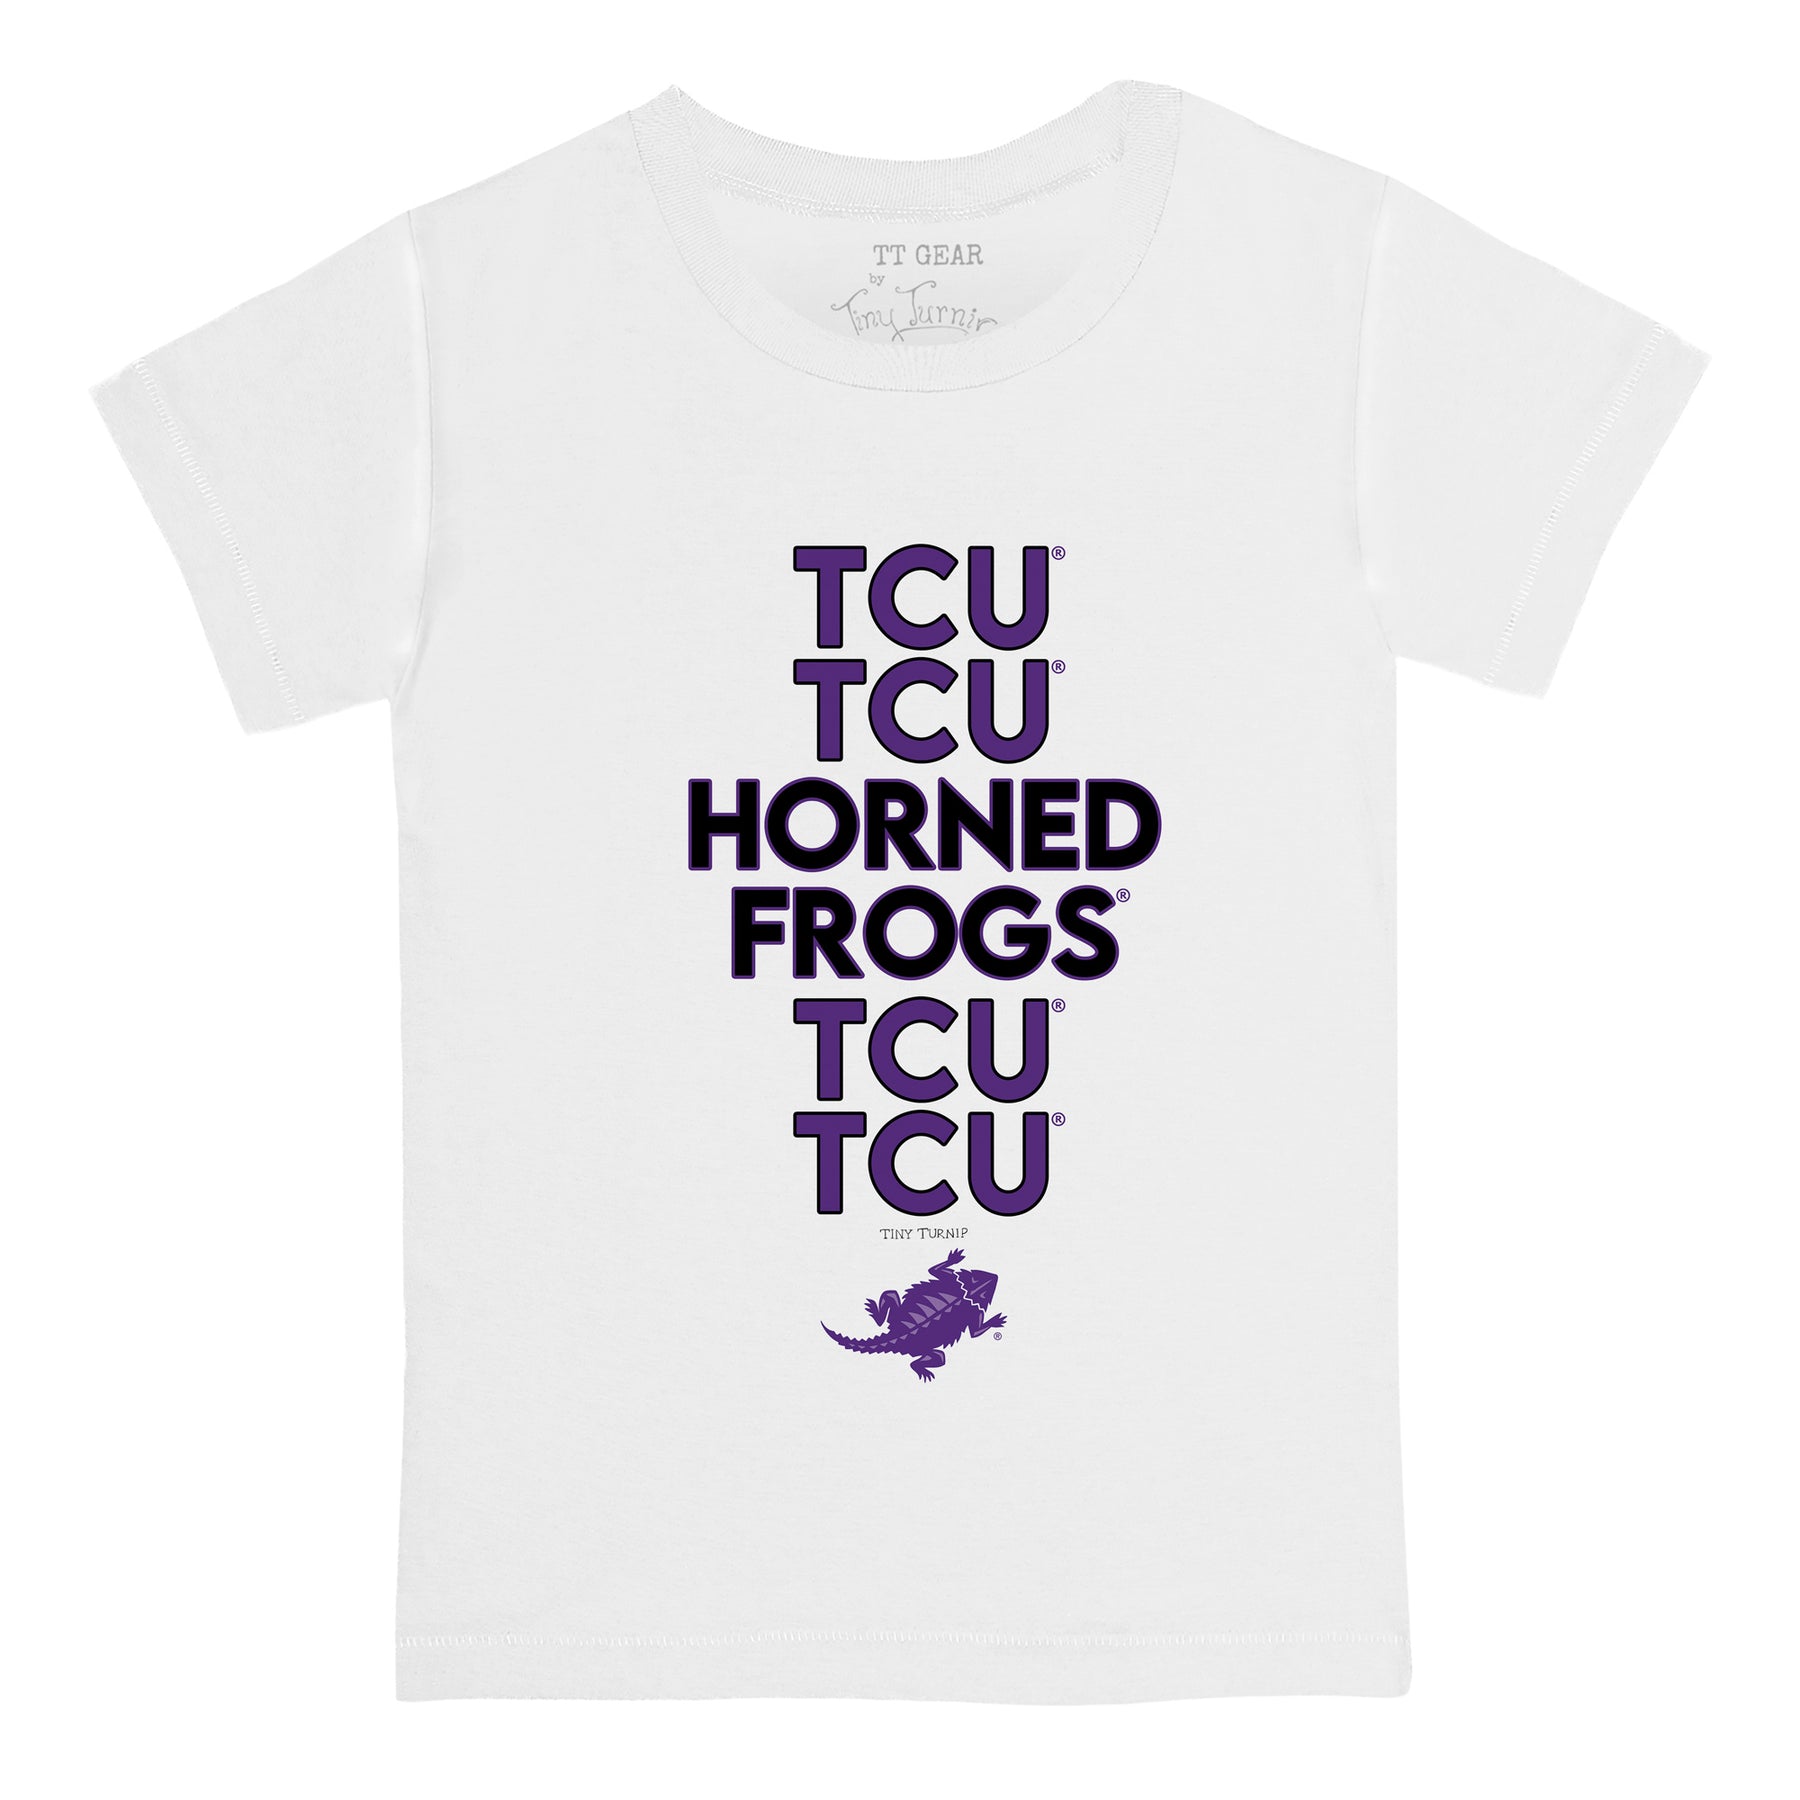 TCU Horned Frogs Stacked Tee Shirt